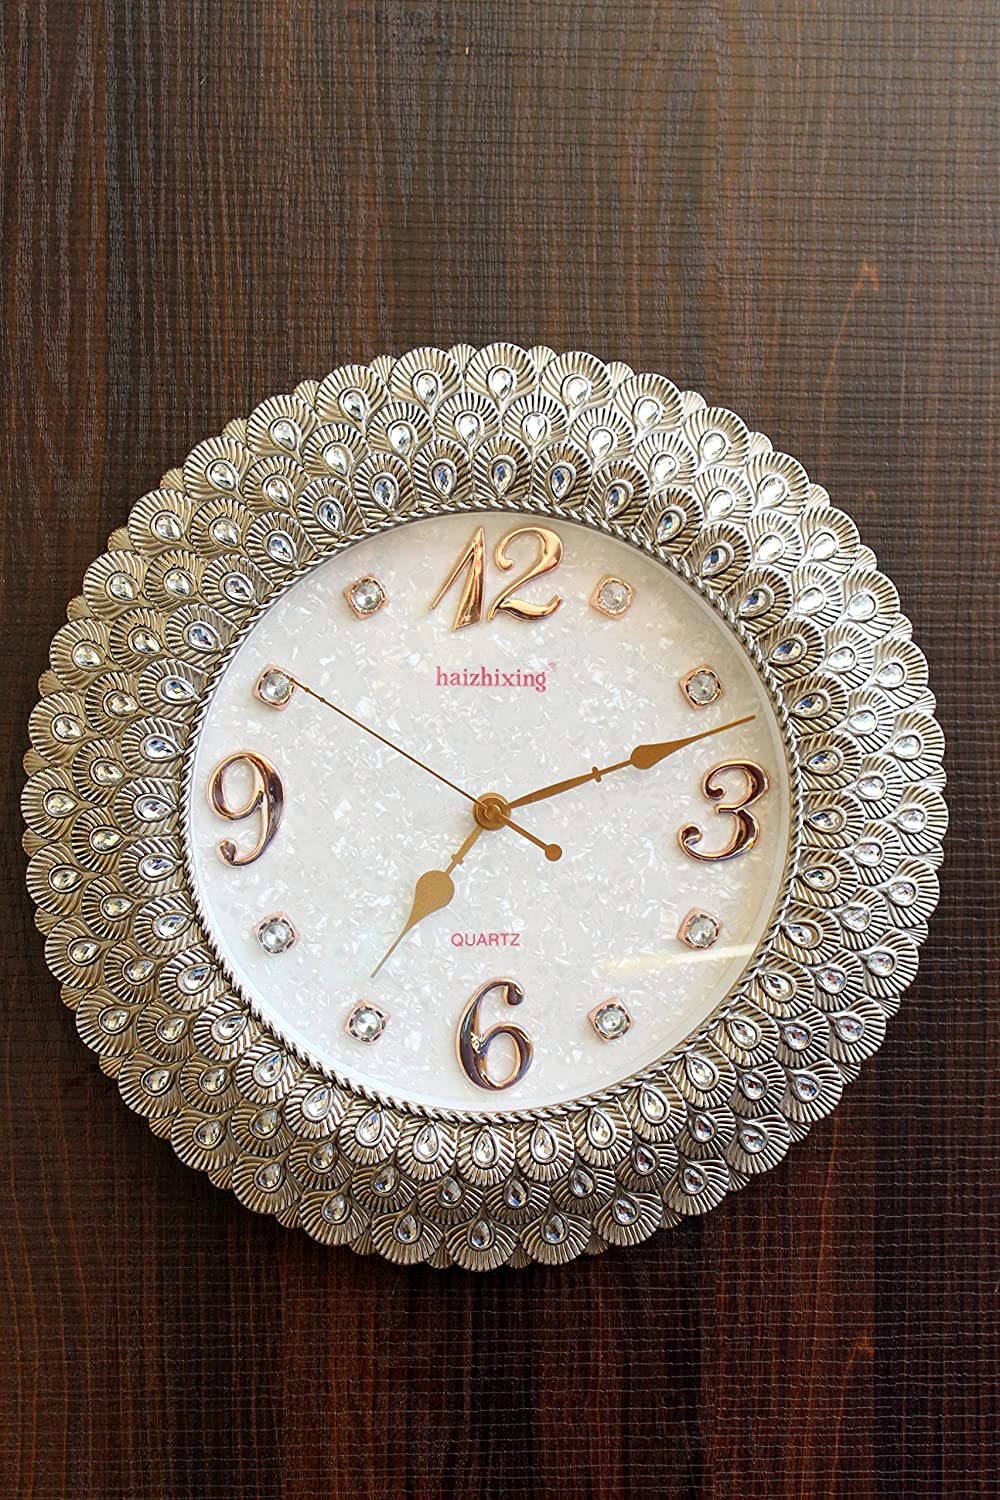 FunkyTradition Royal Pearl Silver Grey Wall Clock, Wall Watch, Wall Decor for Home Office Decor and Gifts 43 cm Tall